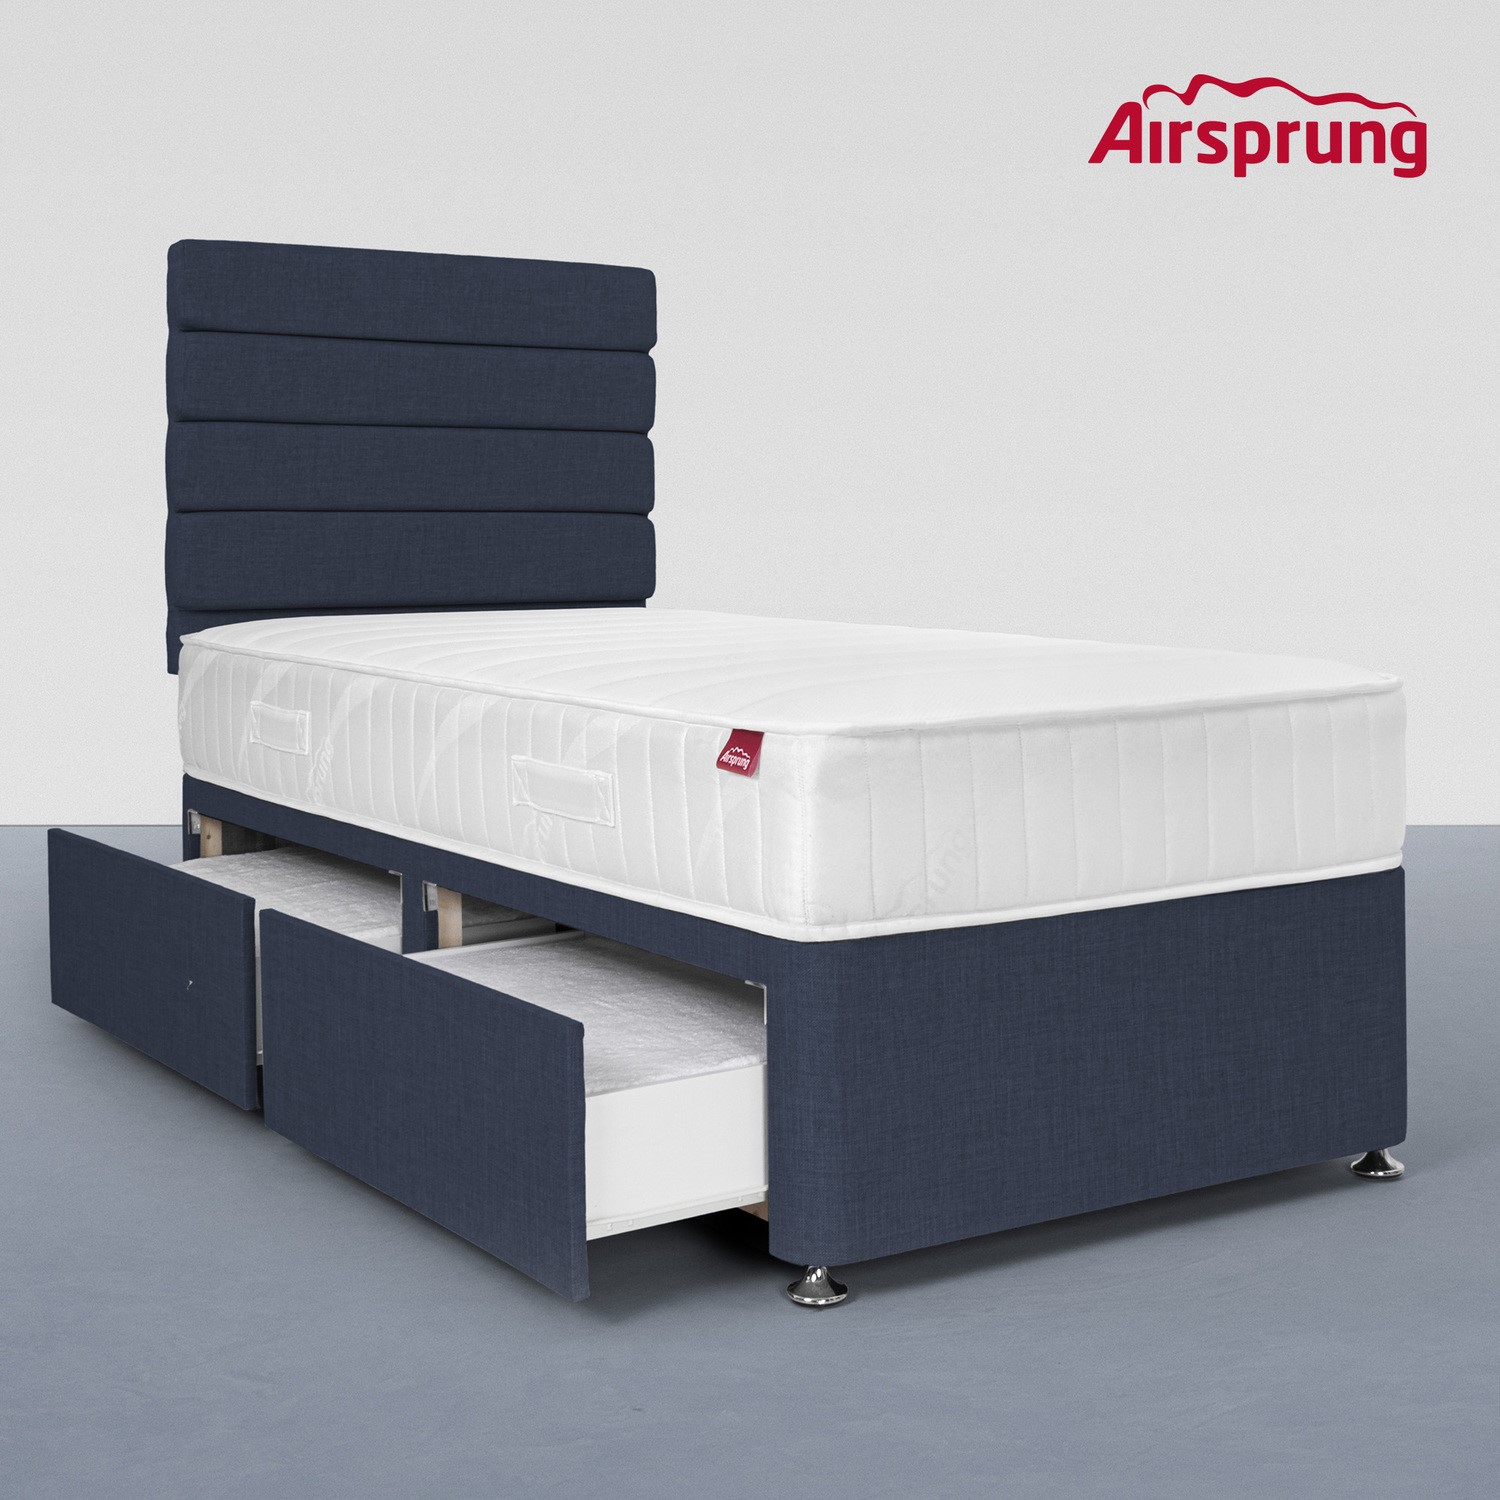 Read more about Airsprung single 2 drawer divan bed with comfort mattress midnight blue